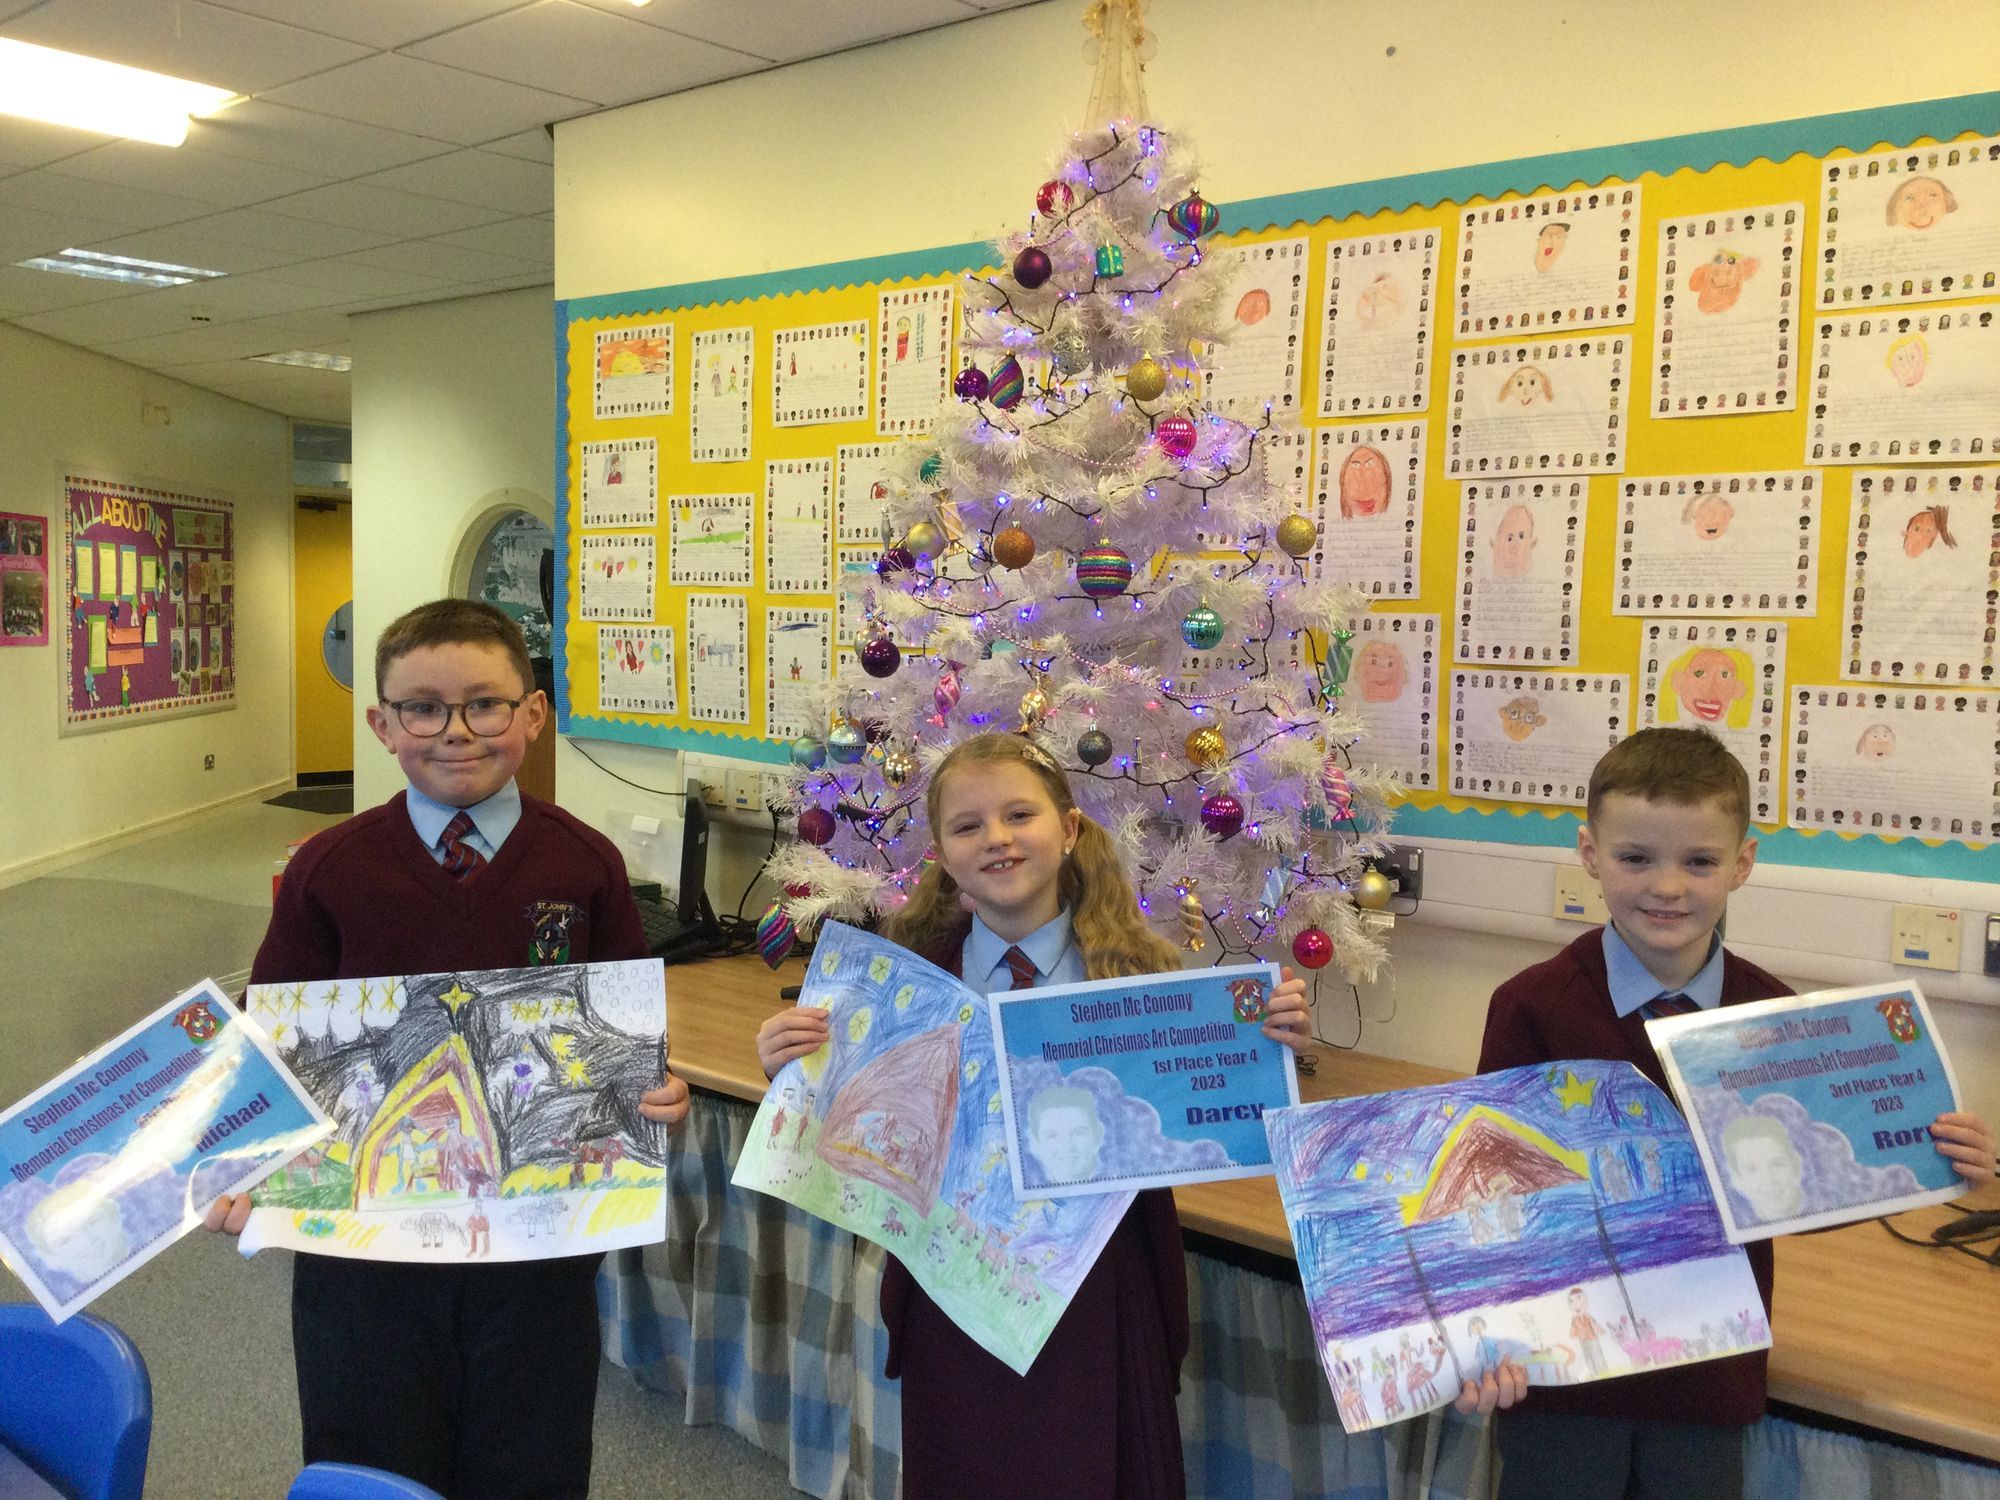 Stephen McConomy art competition winners in year 4